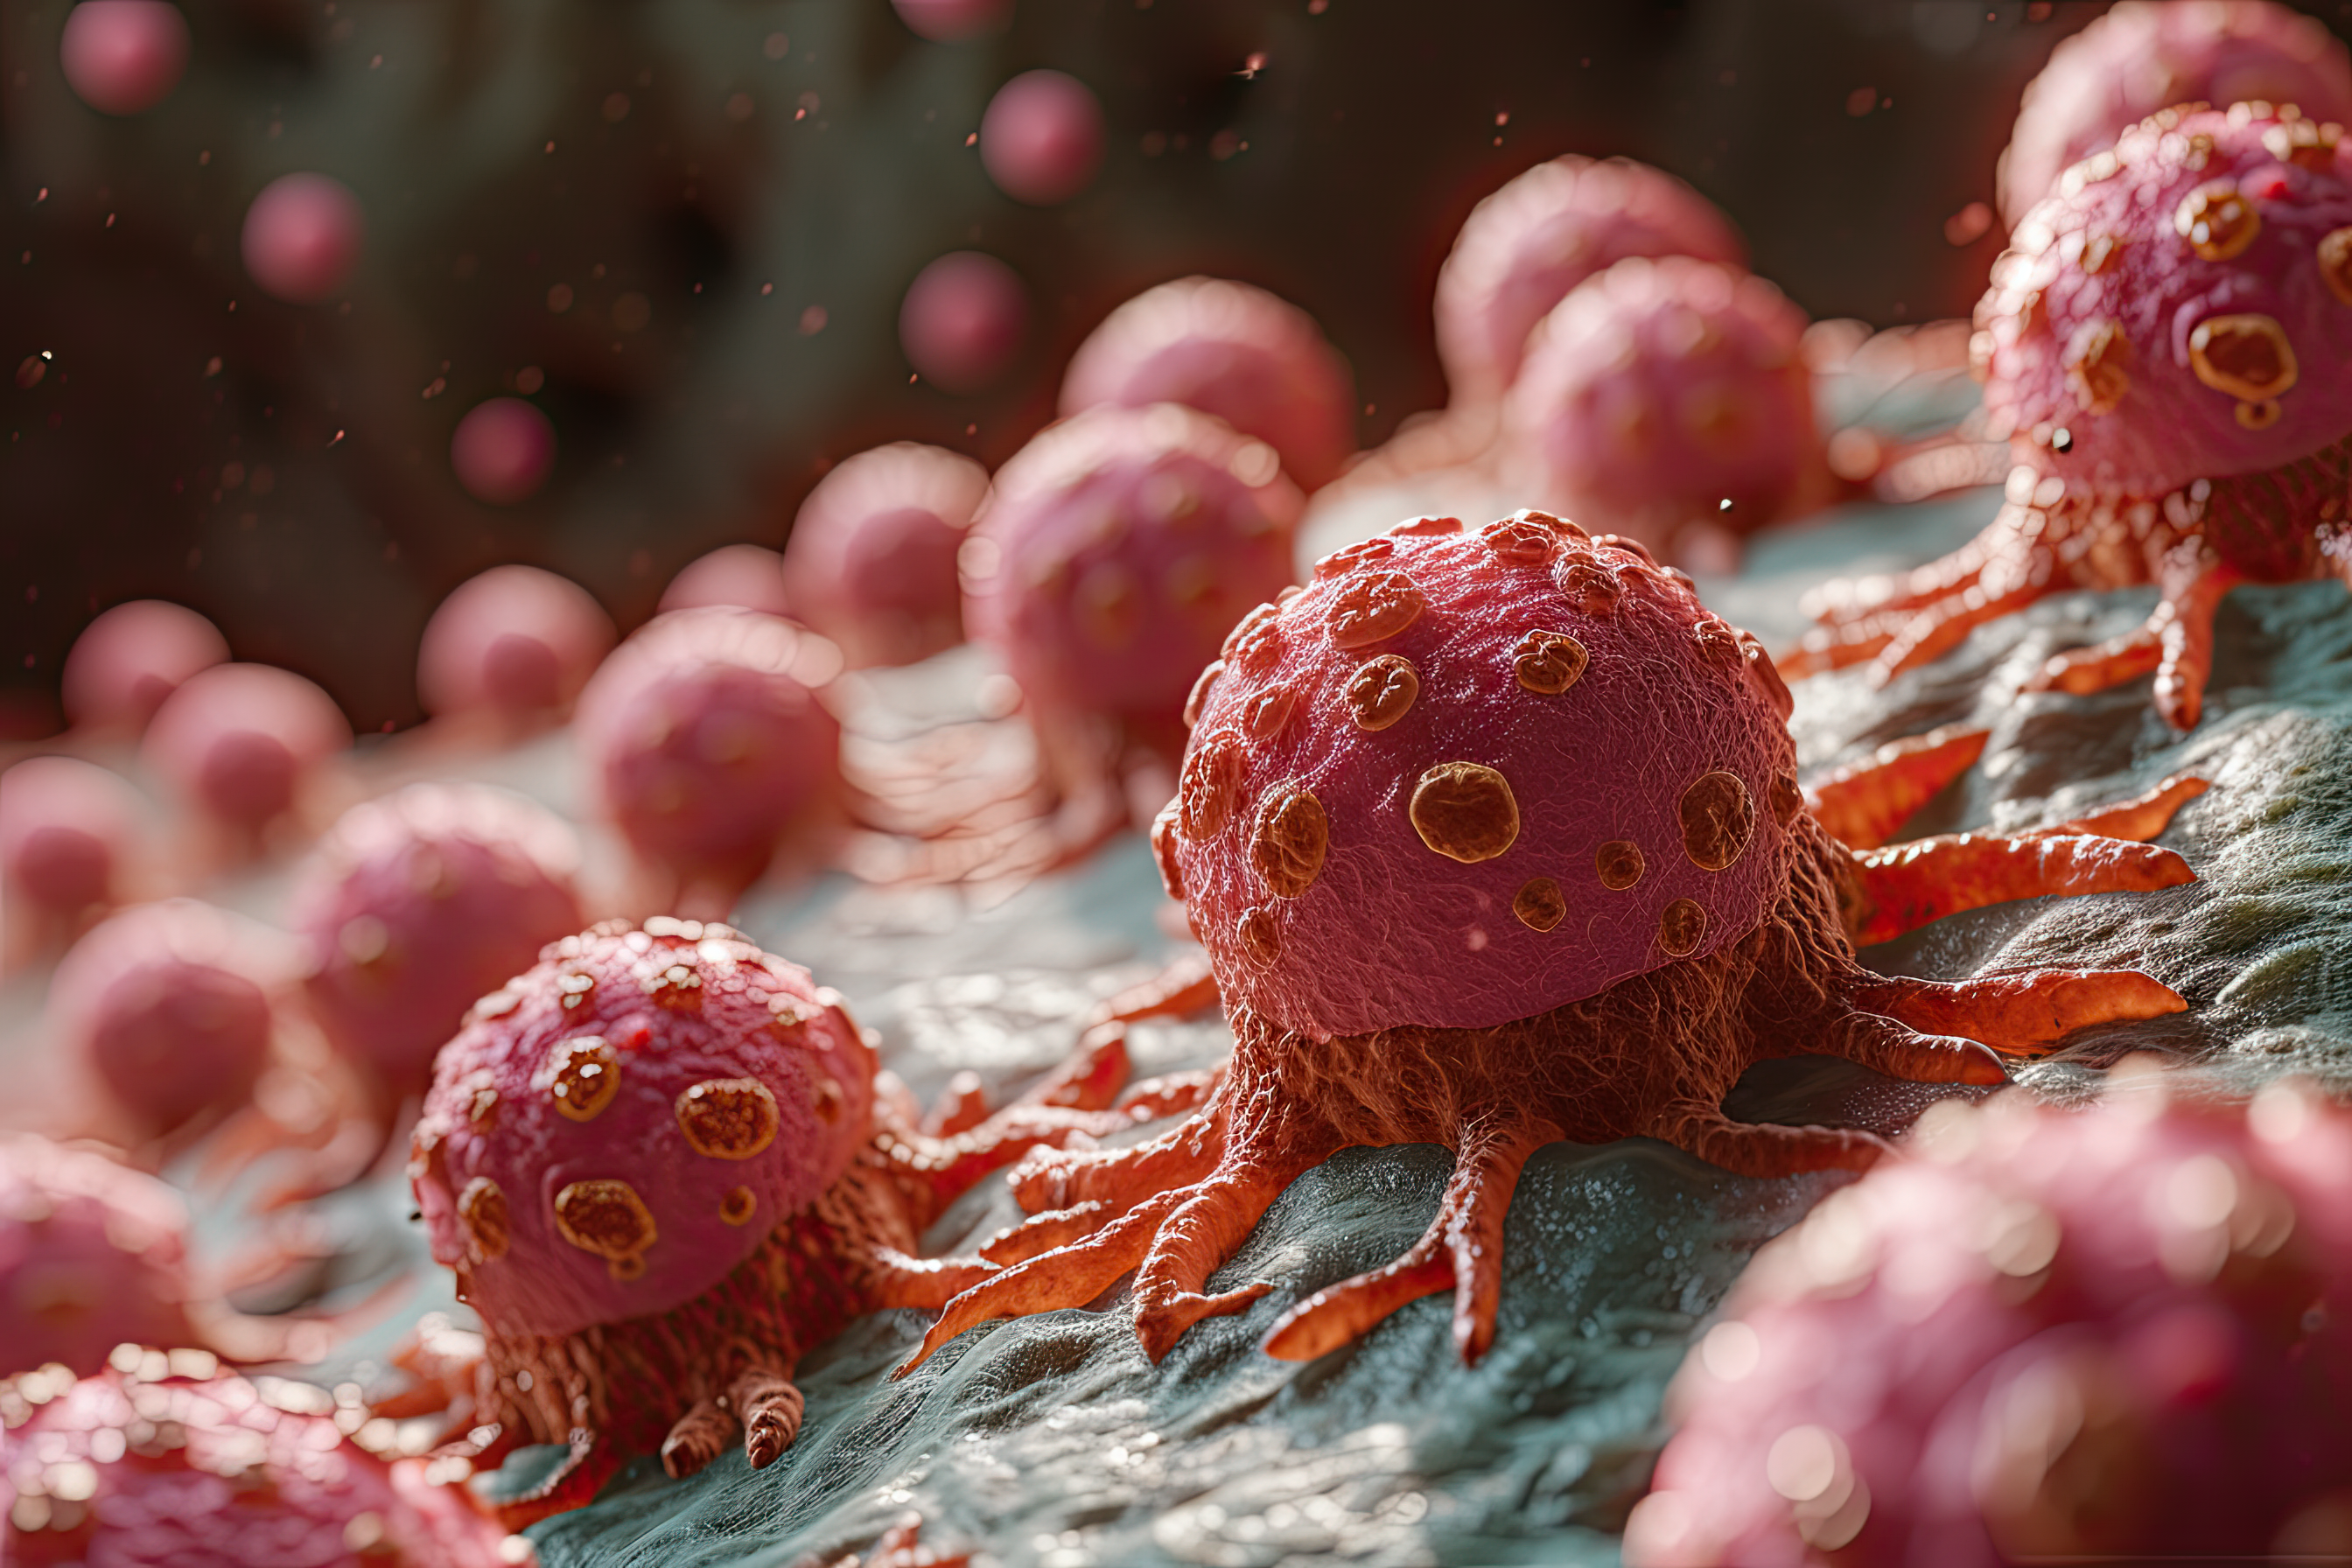 Macro image cancer cells, 3d